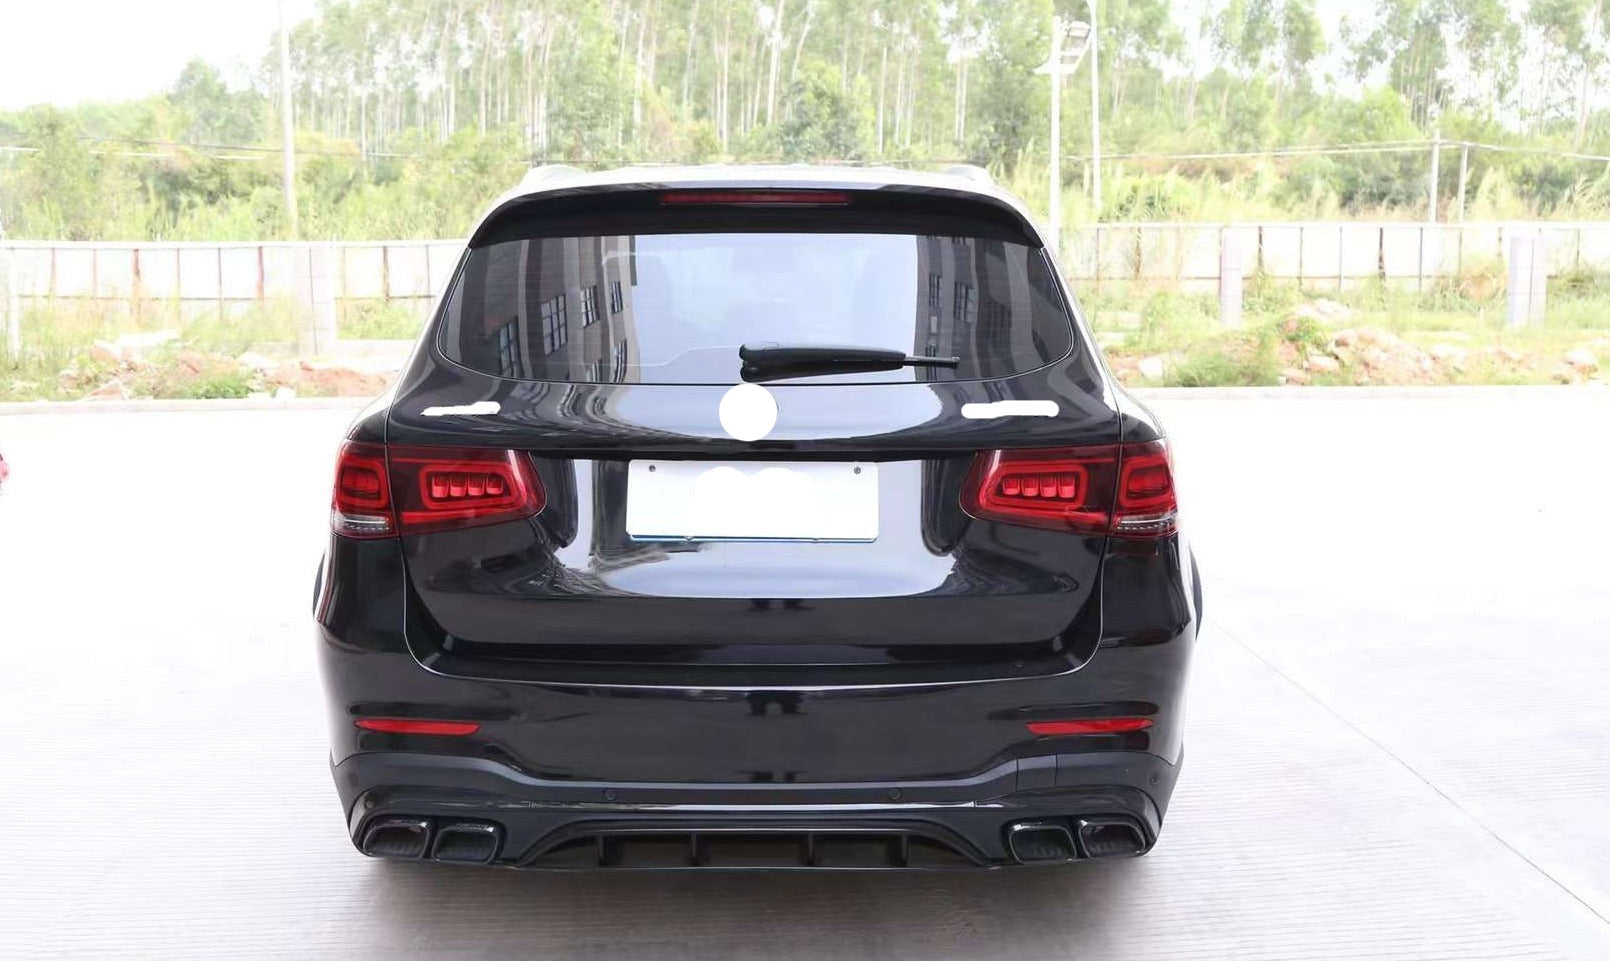 Mercedes GLC Coupe X253 2016-2019 to AMG 63 S Body Kit Conversion – BGL  Body Kits & Accessories